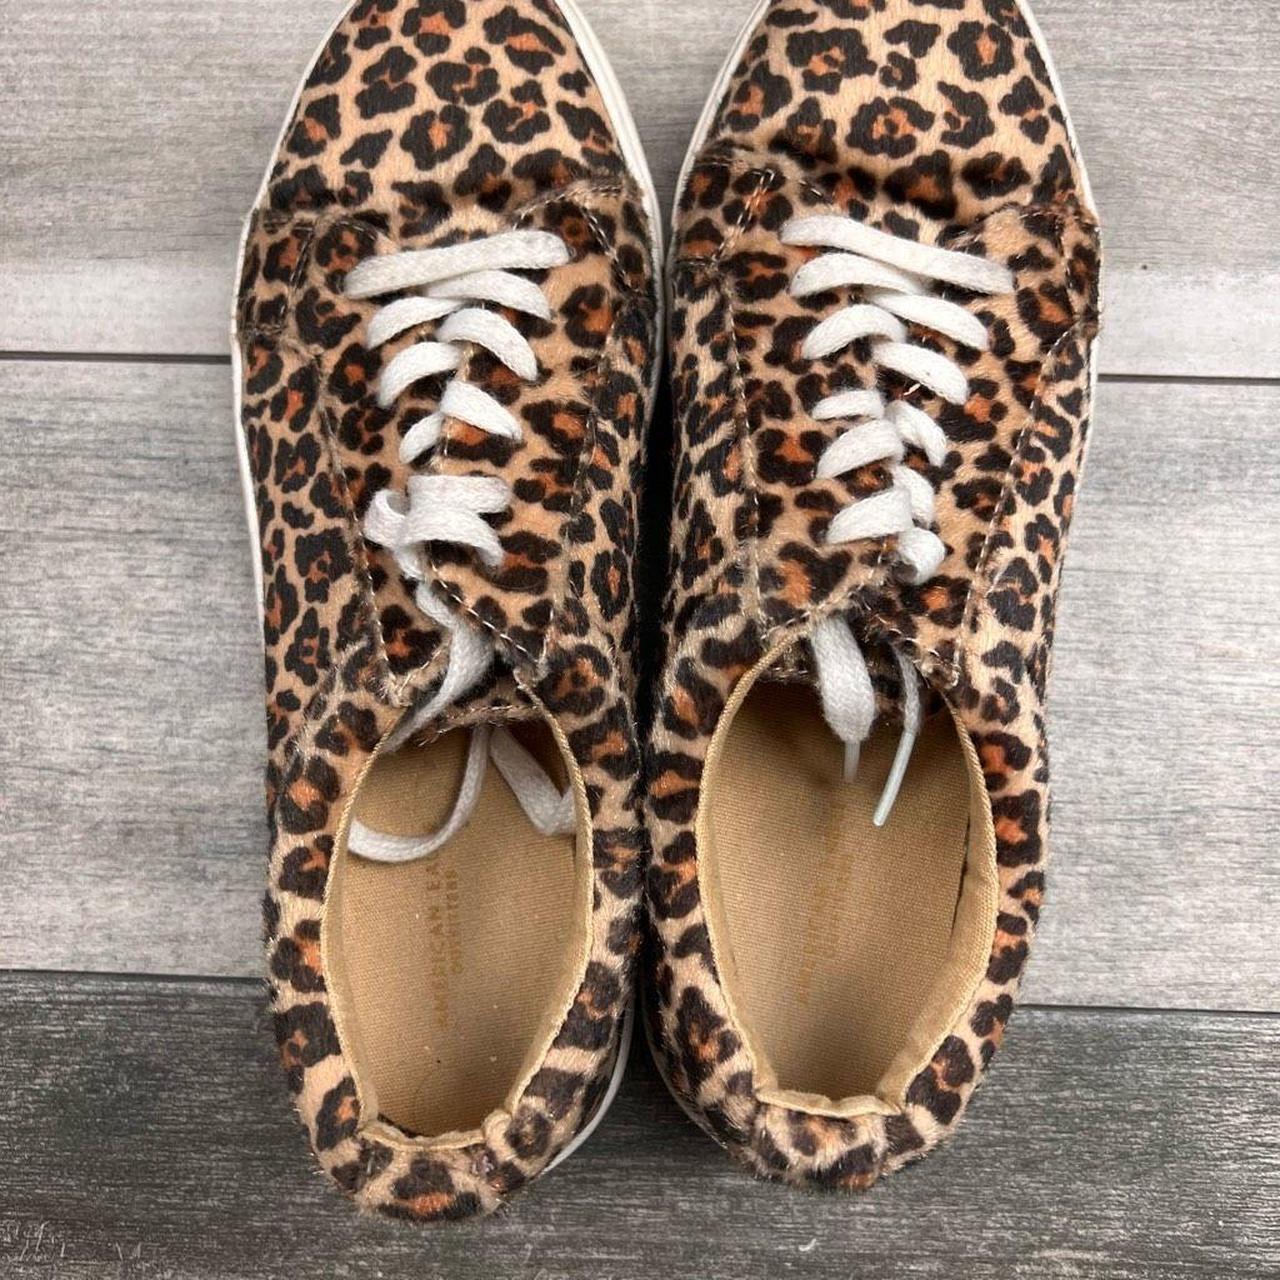 American Eagle Outfitters Leopard/Cheetah Print Pony Hair Leather